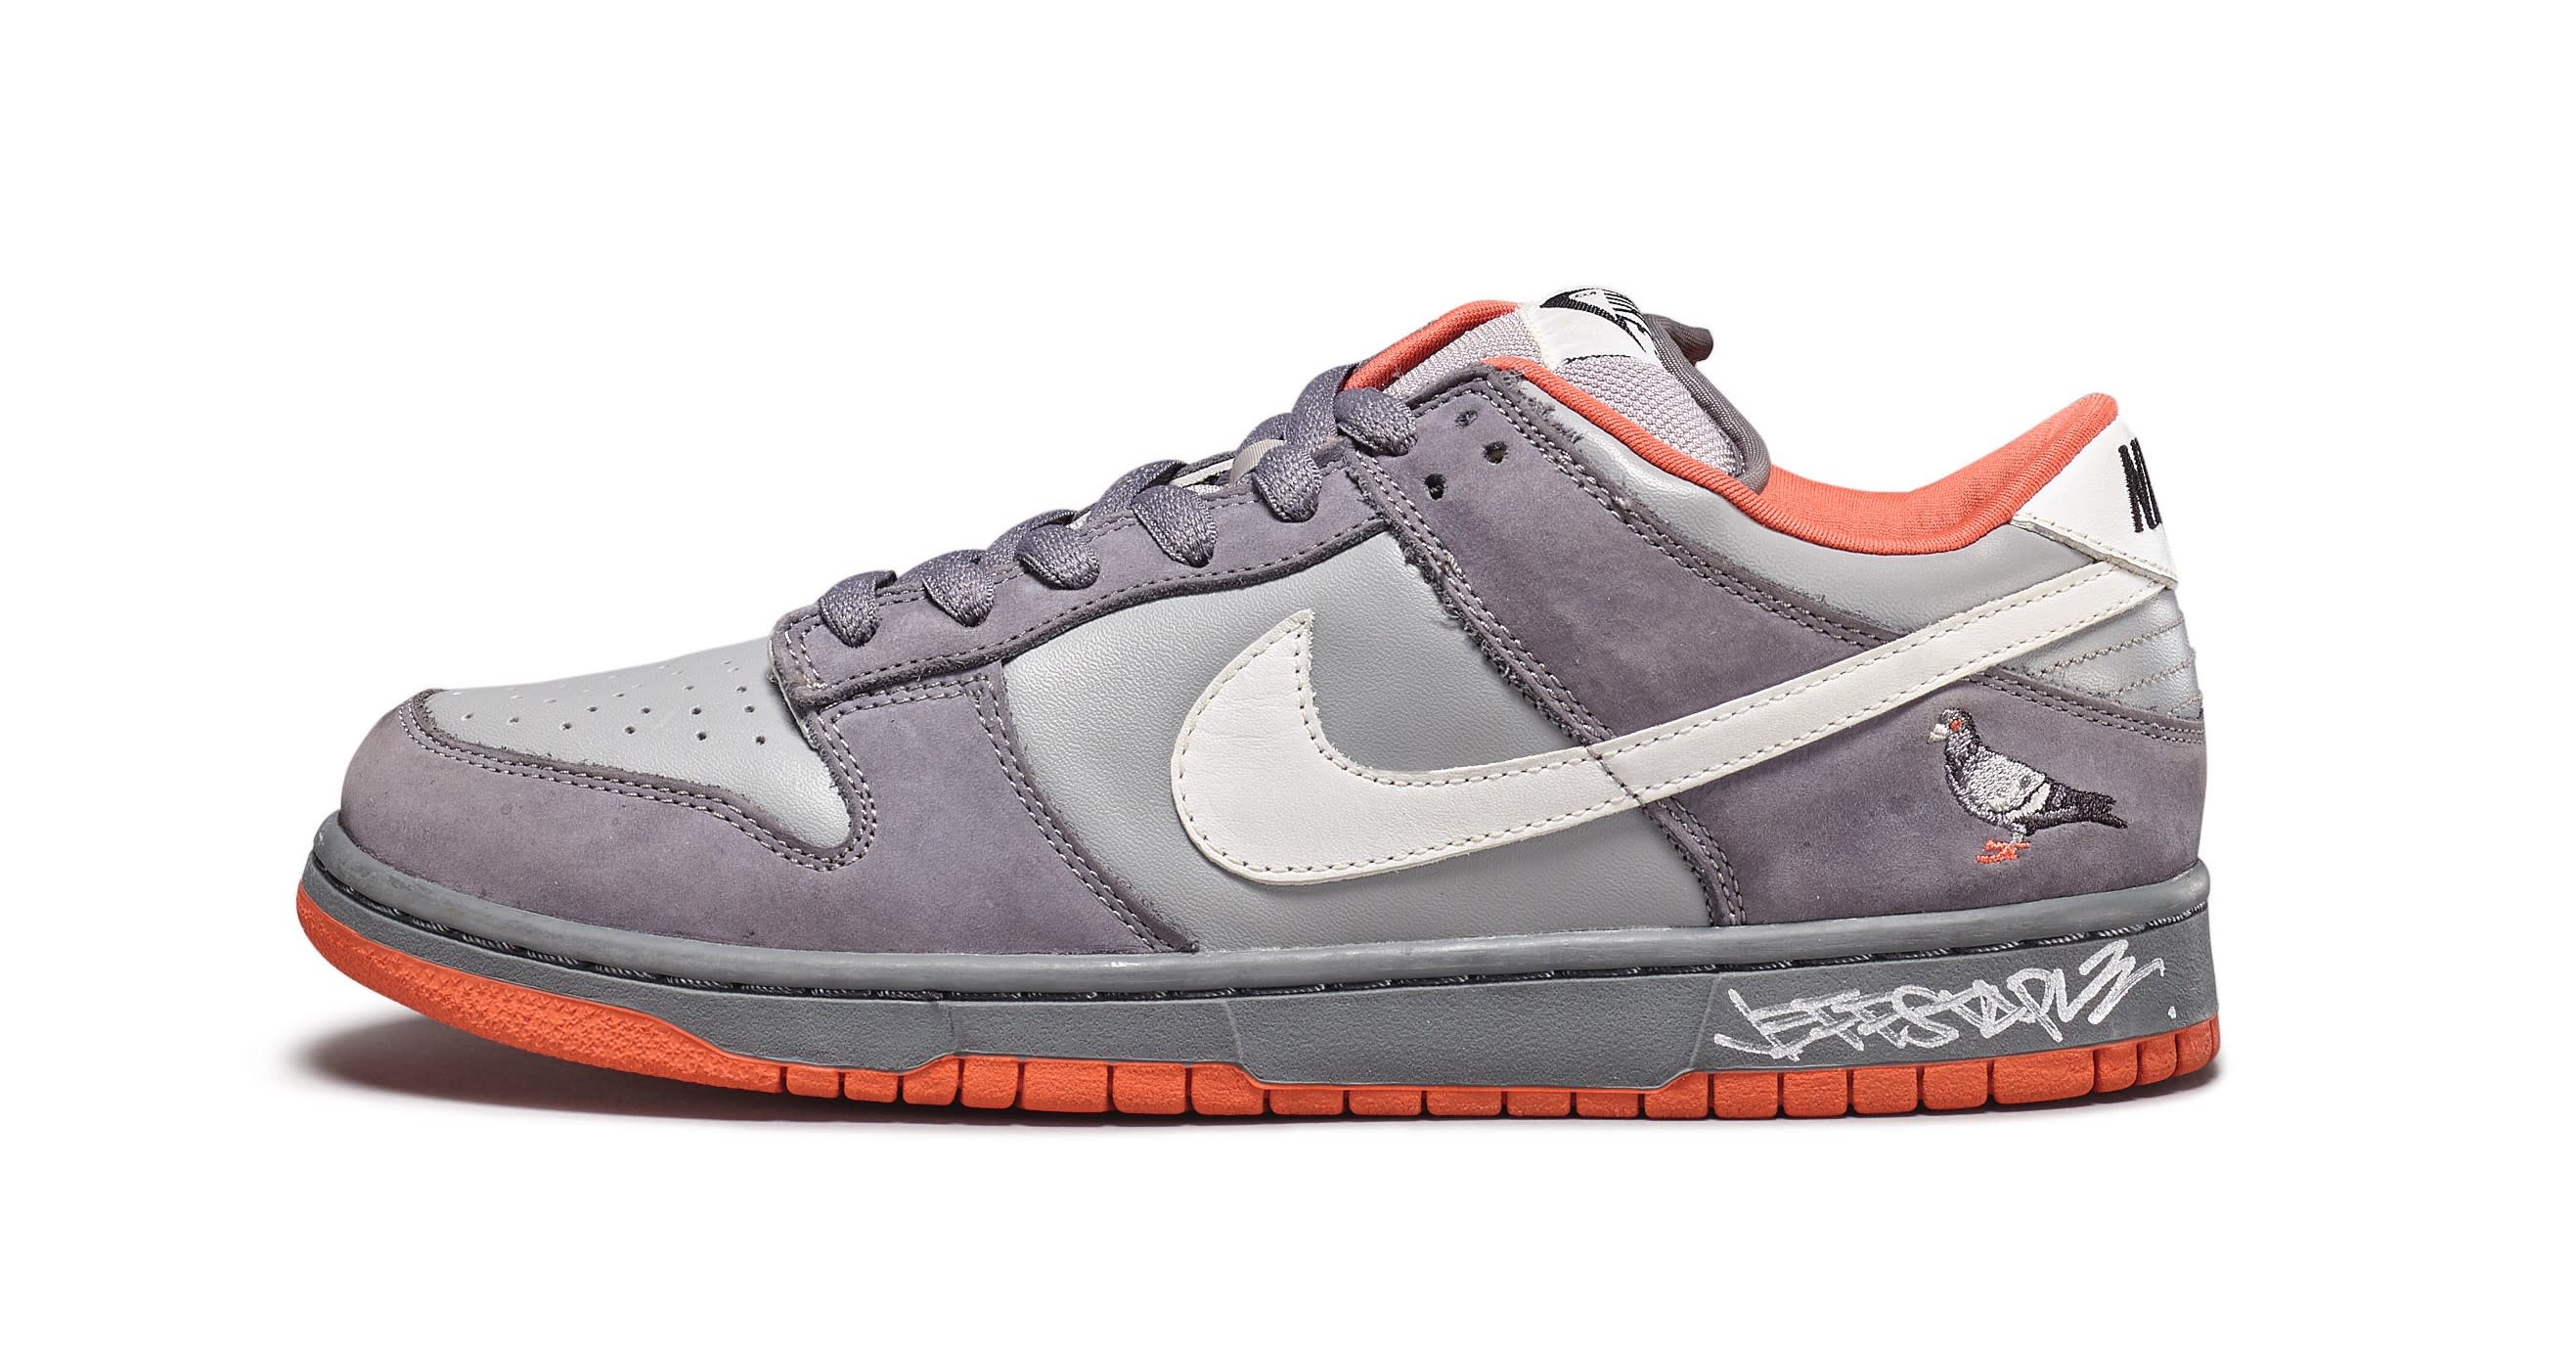 Nike v. Warren Lotas: The Bootleg Dunks and Their Place in History |